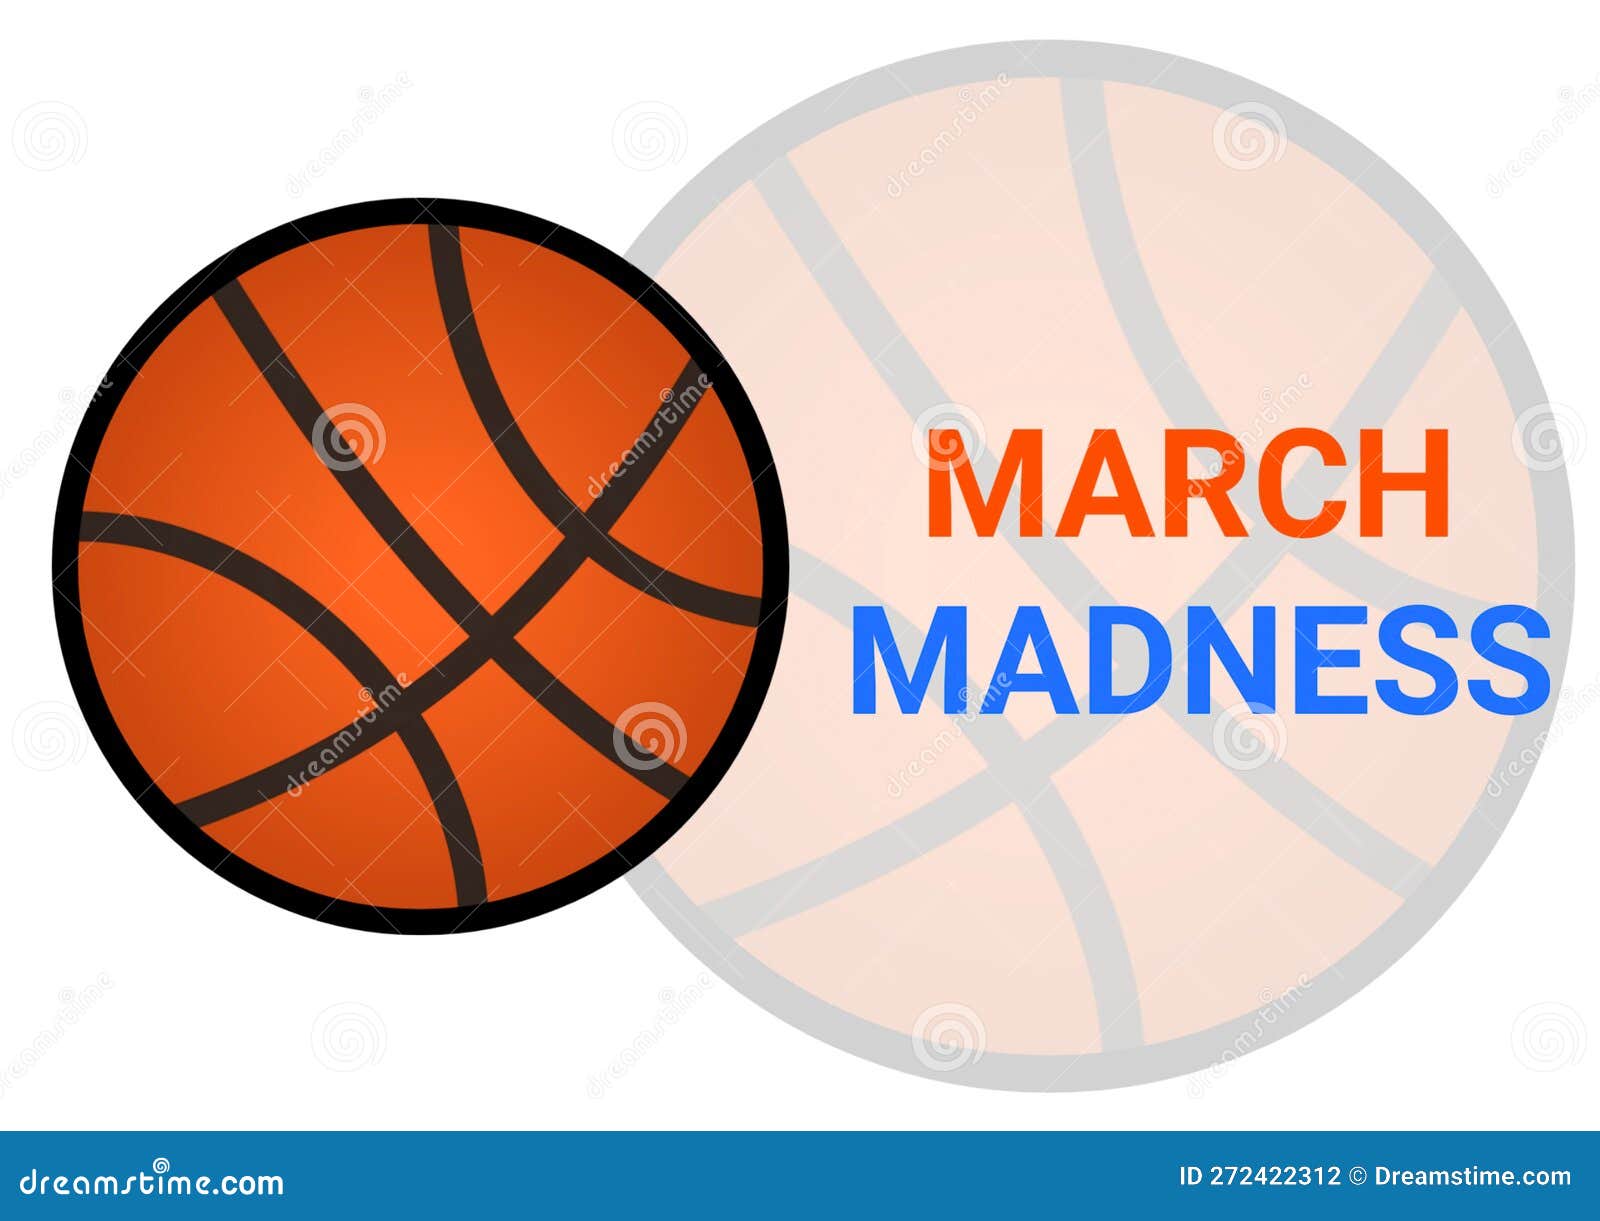 March Madness Stacked 3D Logo Stock Photography | CartoonDealer.com ...